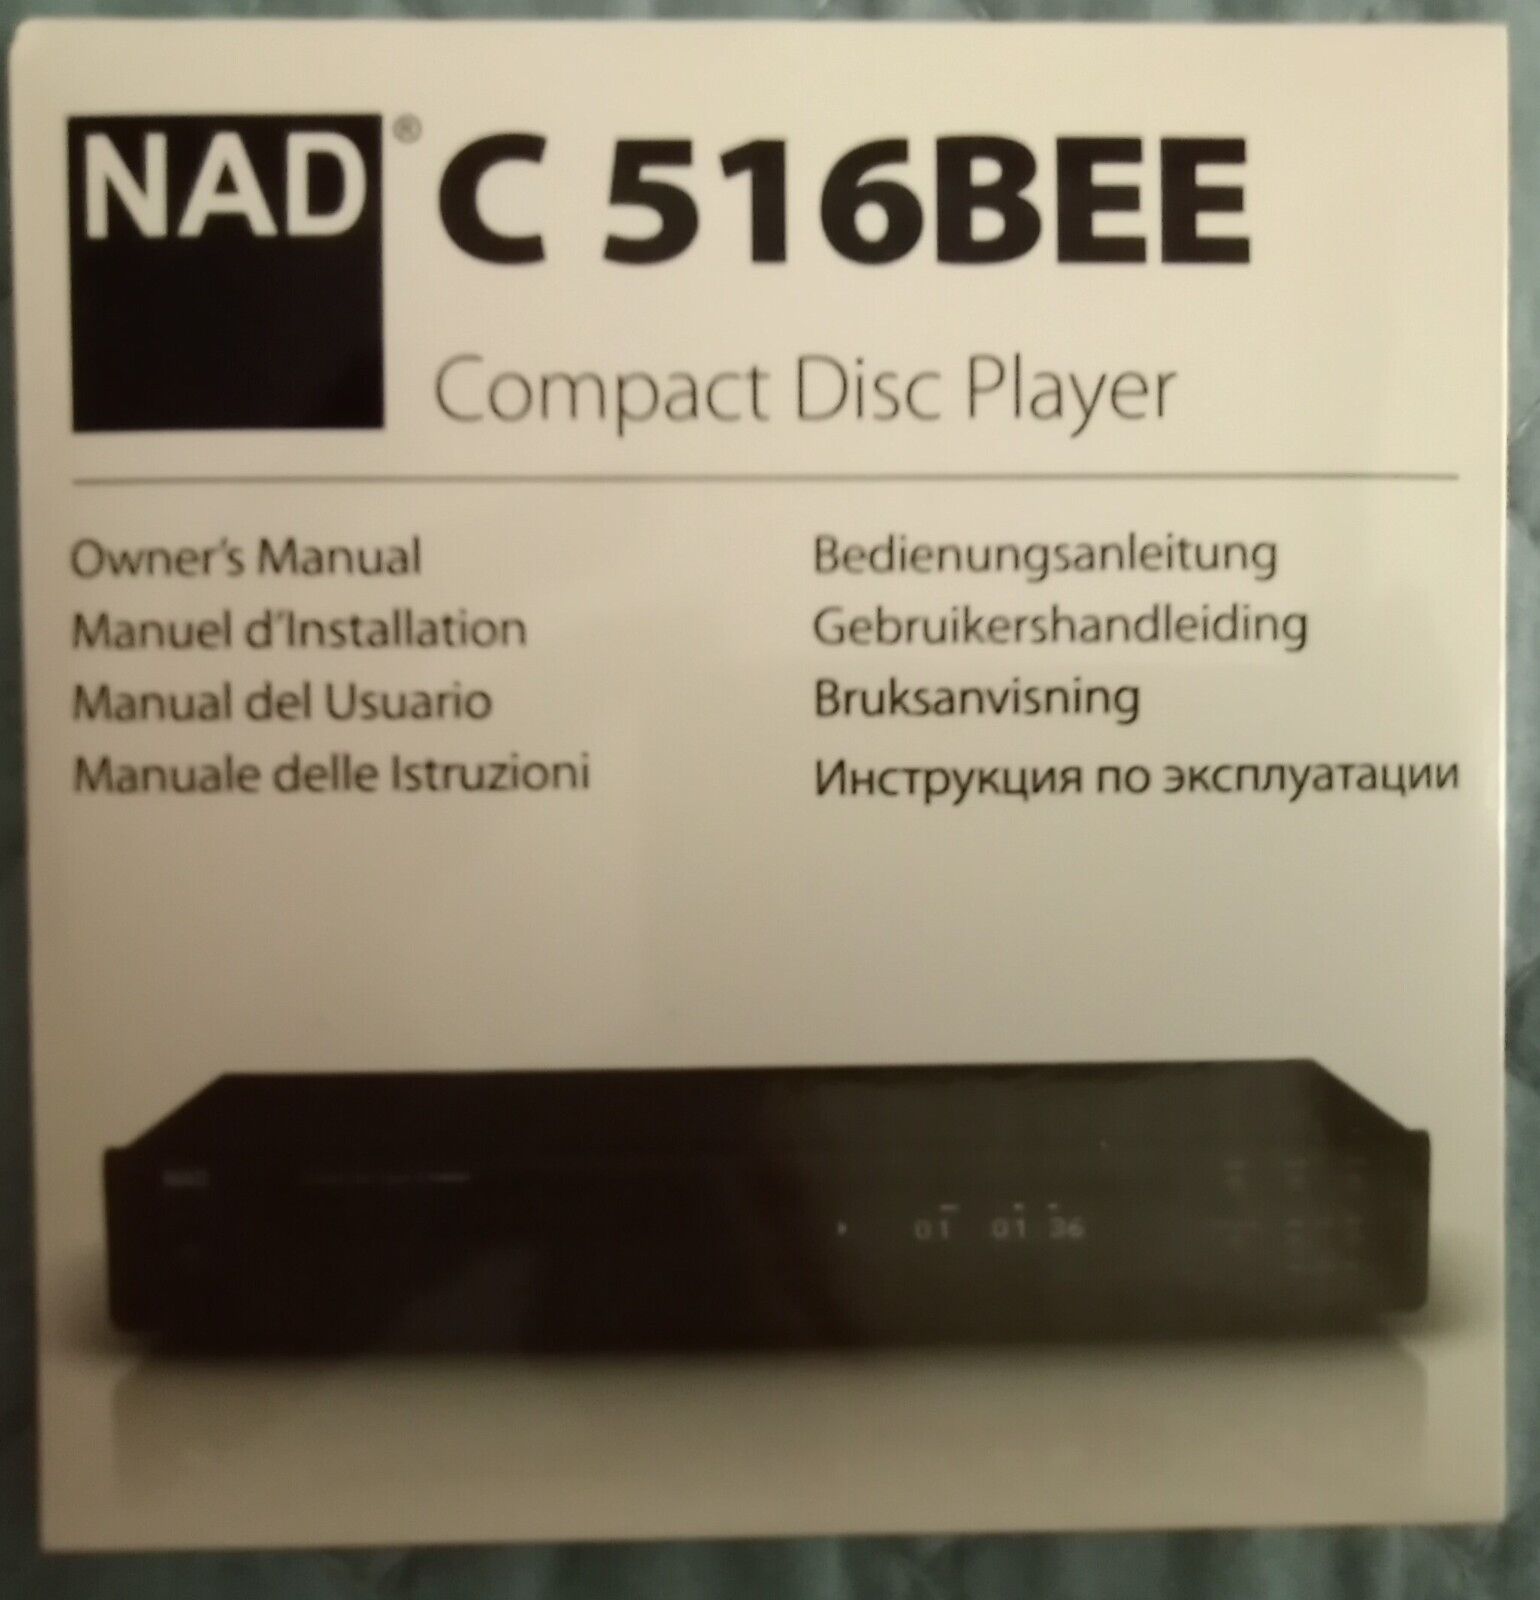 NAD C 516BEE Compact Disc Player Owner\'s Manual on CD w complete packaging